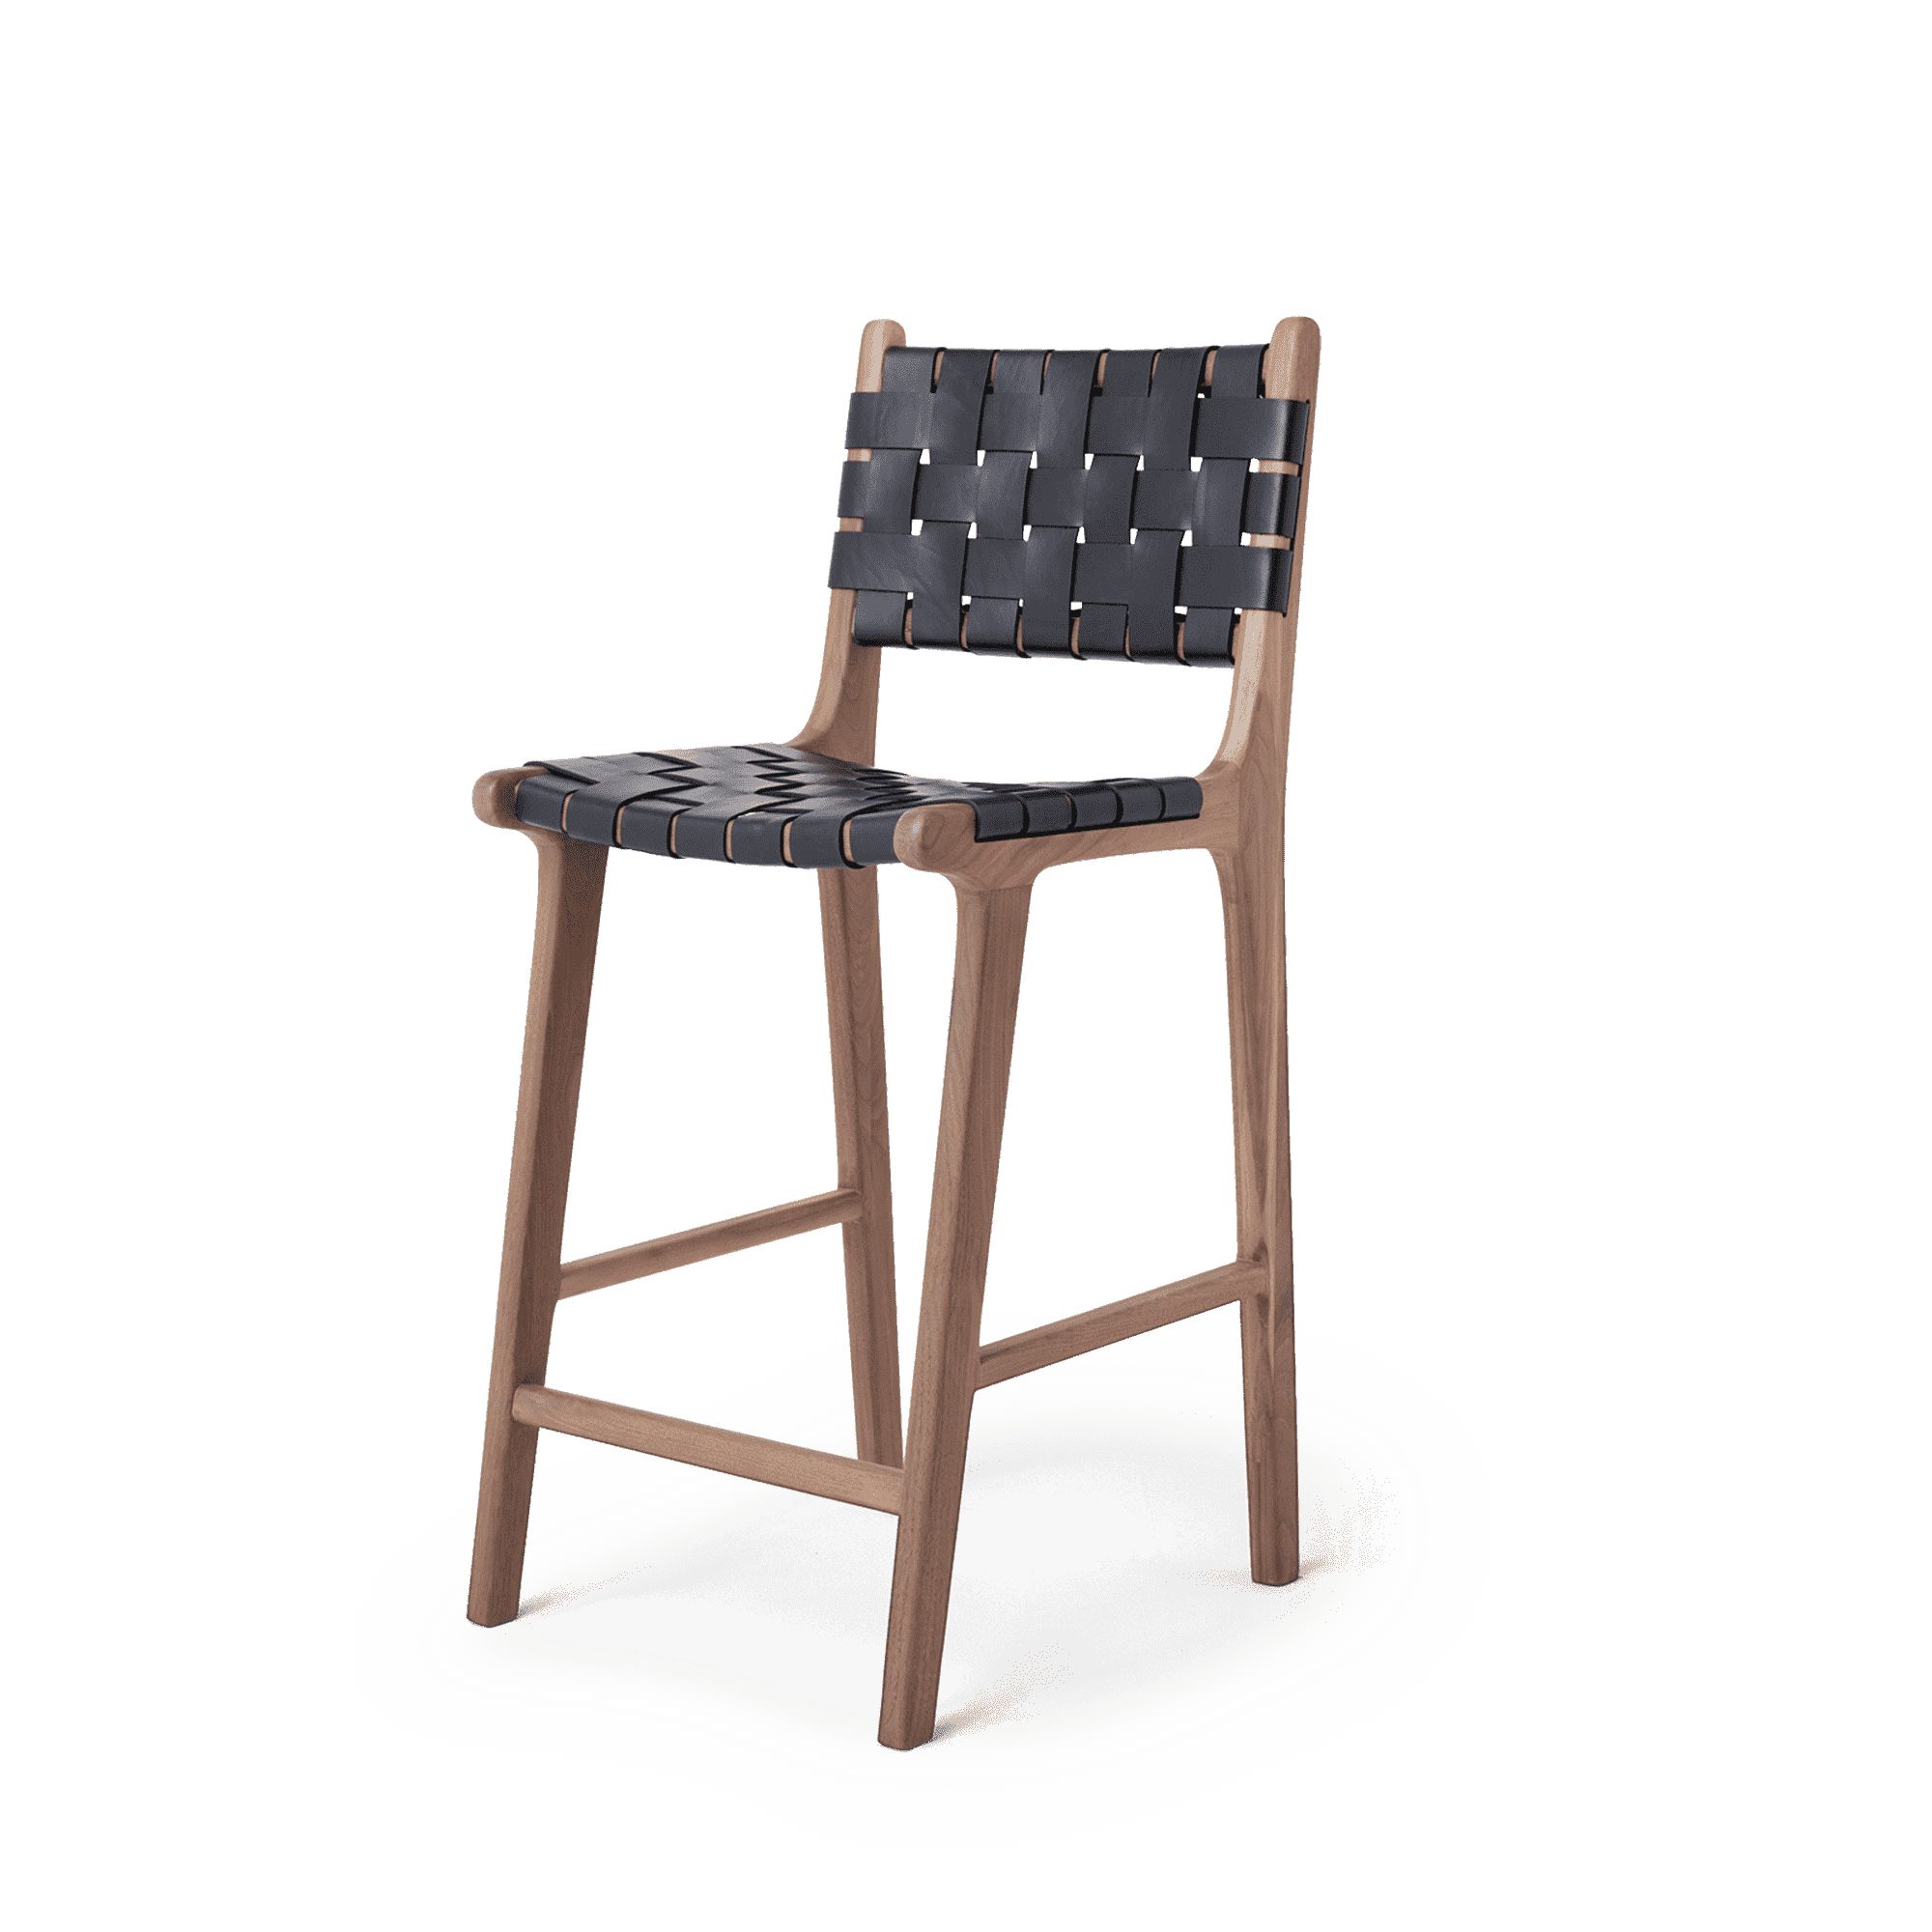 Stool #2 - Counter Stool in Walnut with Woven Black Leather | Hati Home